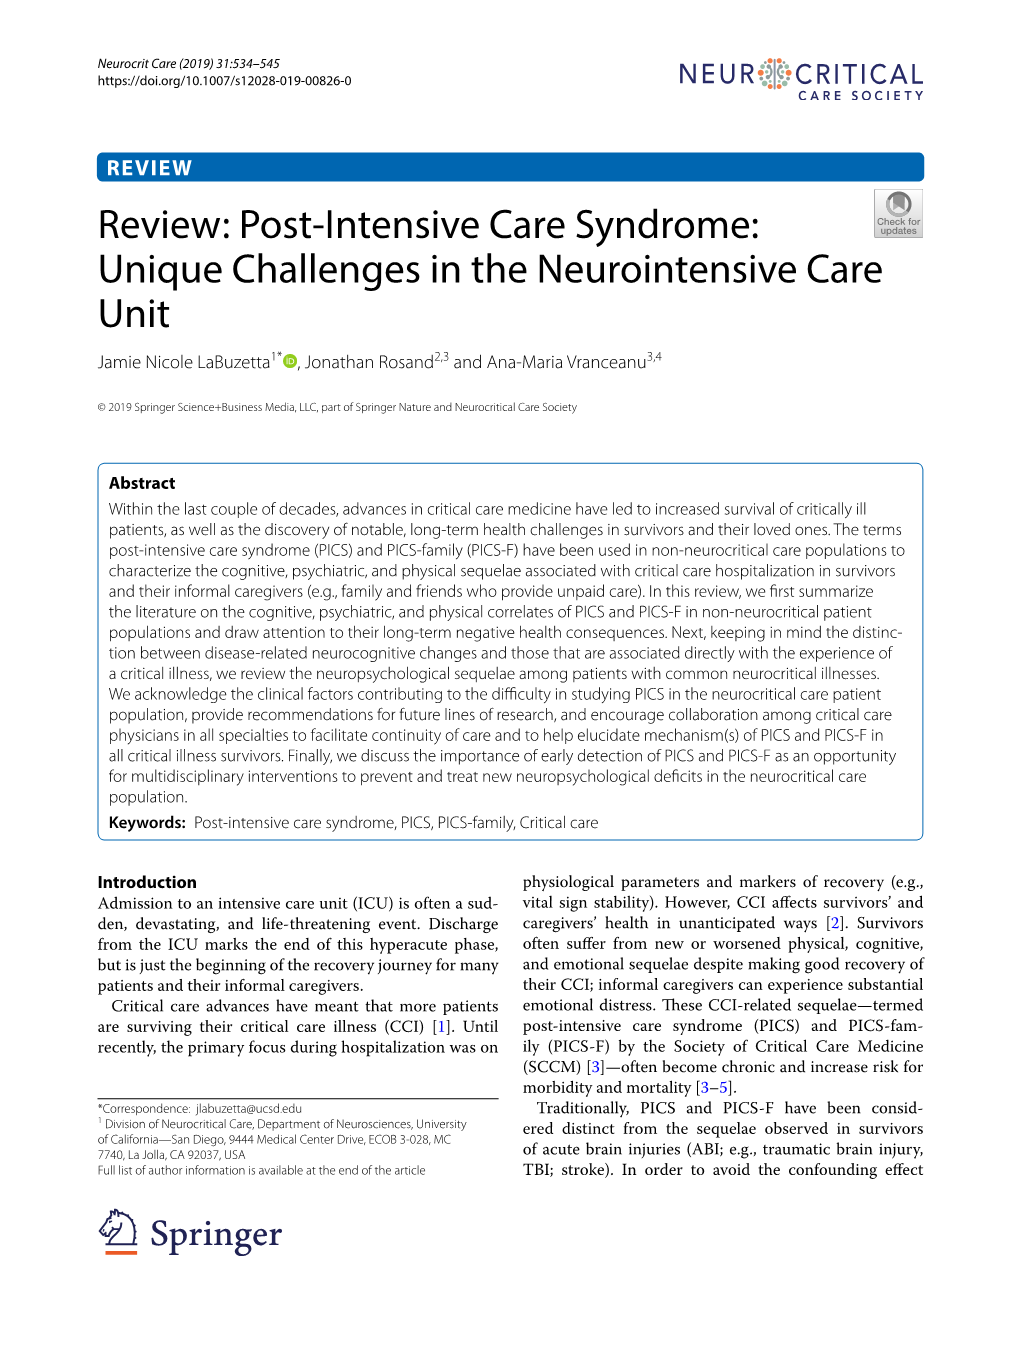 Review: Post-Intensive Care Syndrome: Unique Challenges In